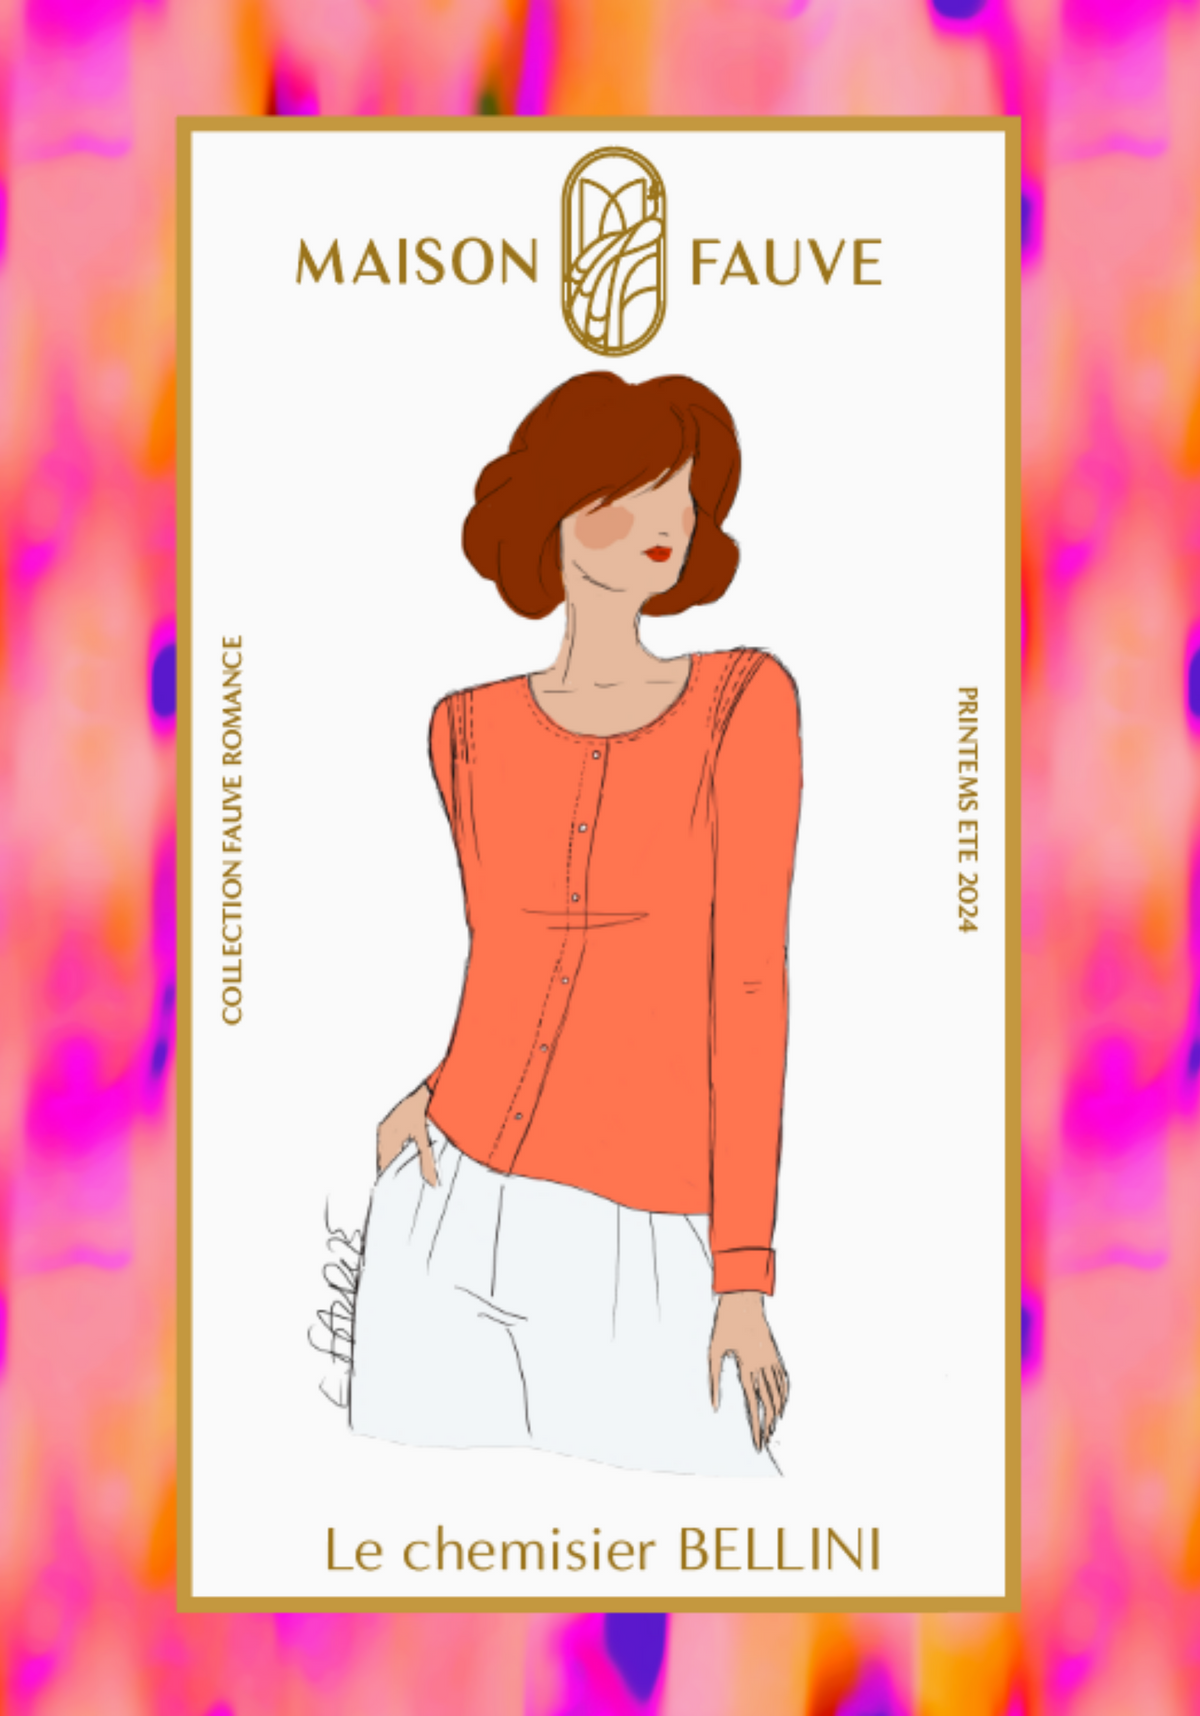 BELLINI Blouse Sewing Pattern by Maison Fauve